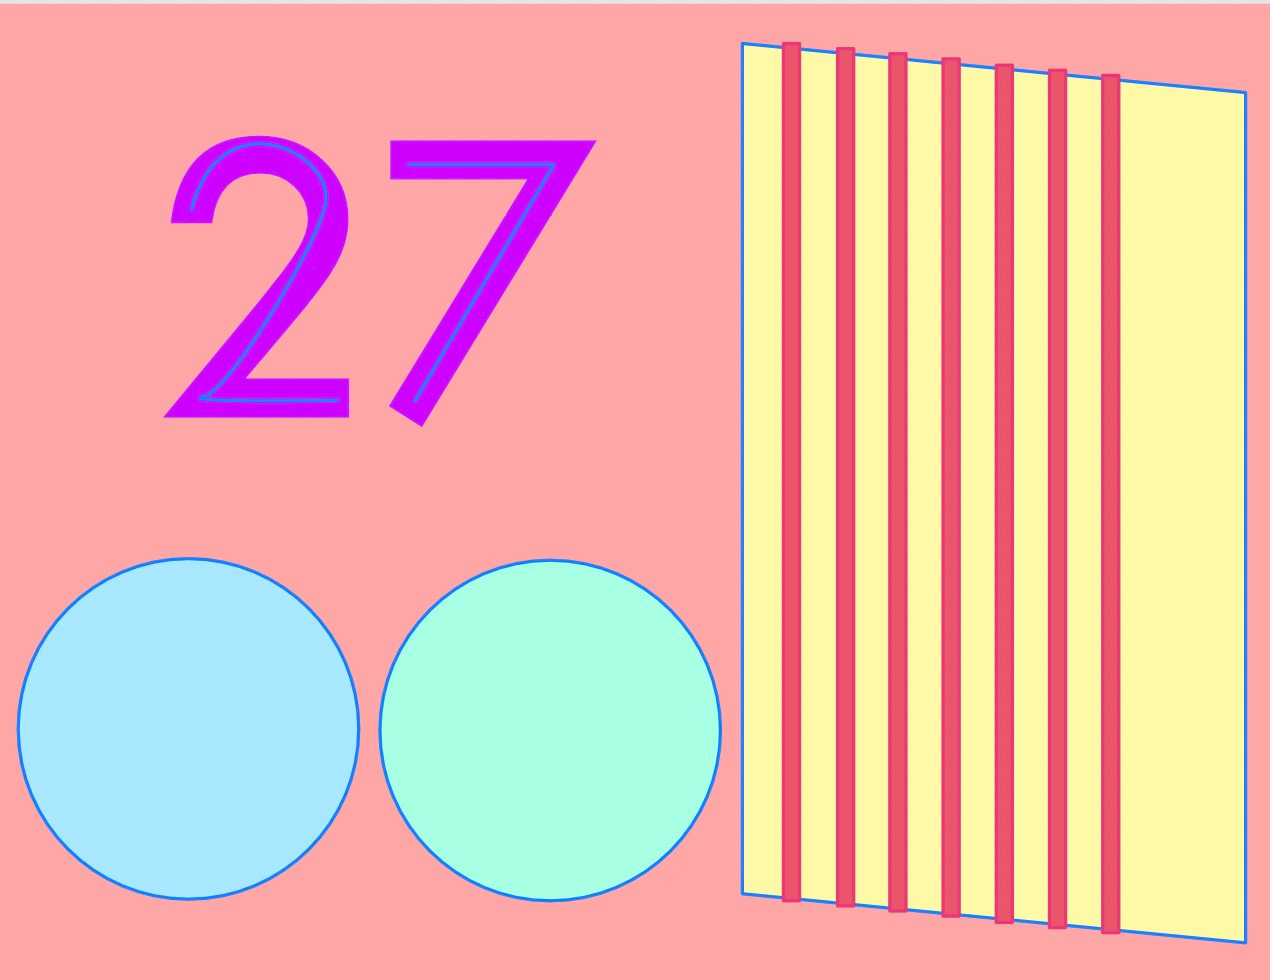 A design incorporating the number 27, two circles, and a parallelogram with 7 vertical stripes.